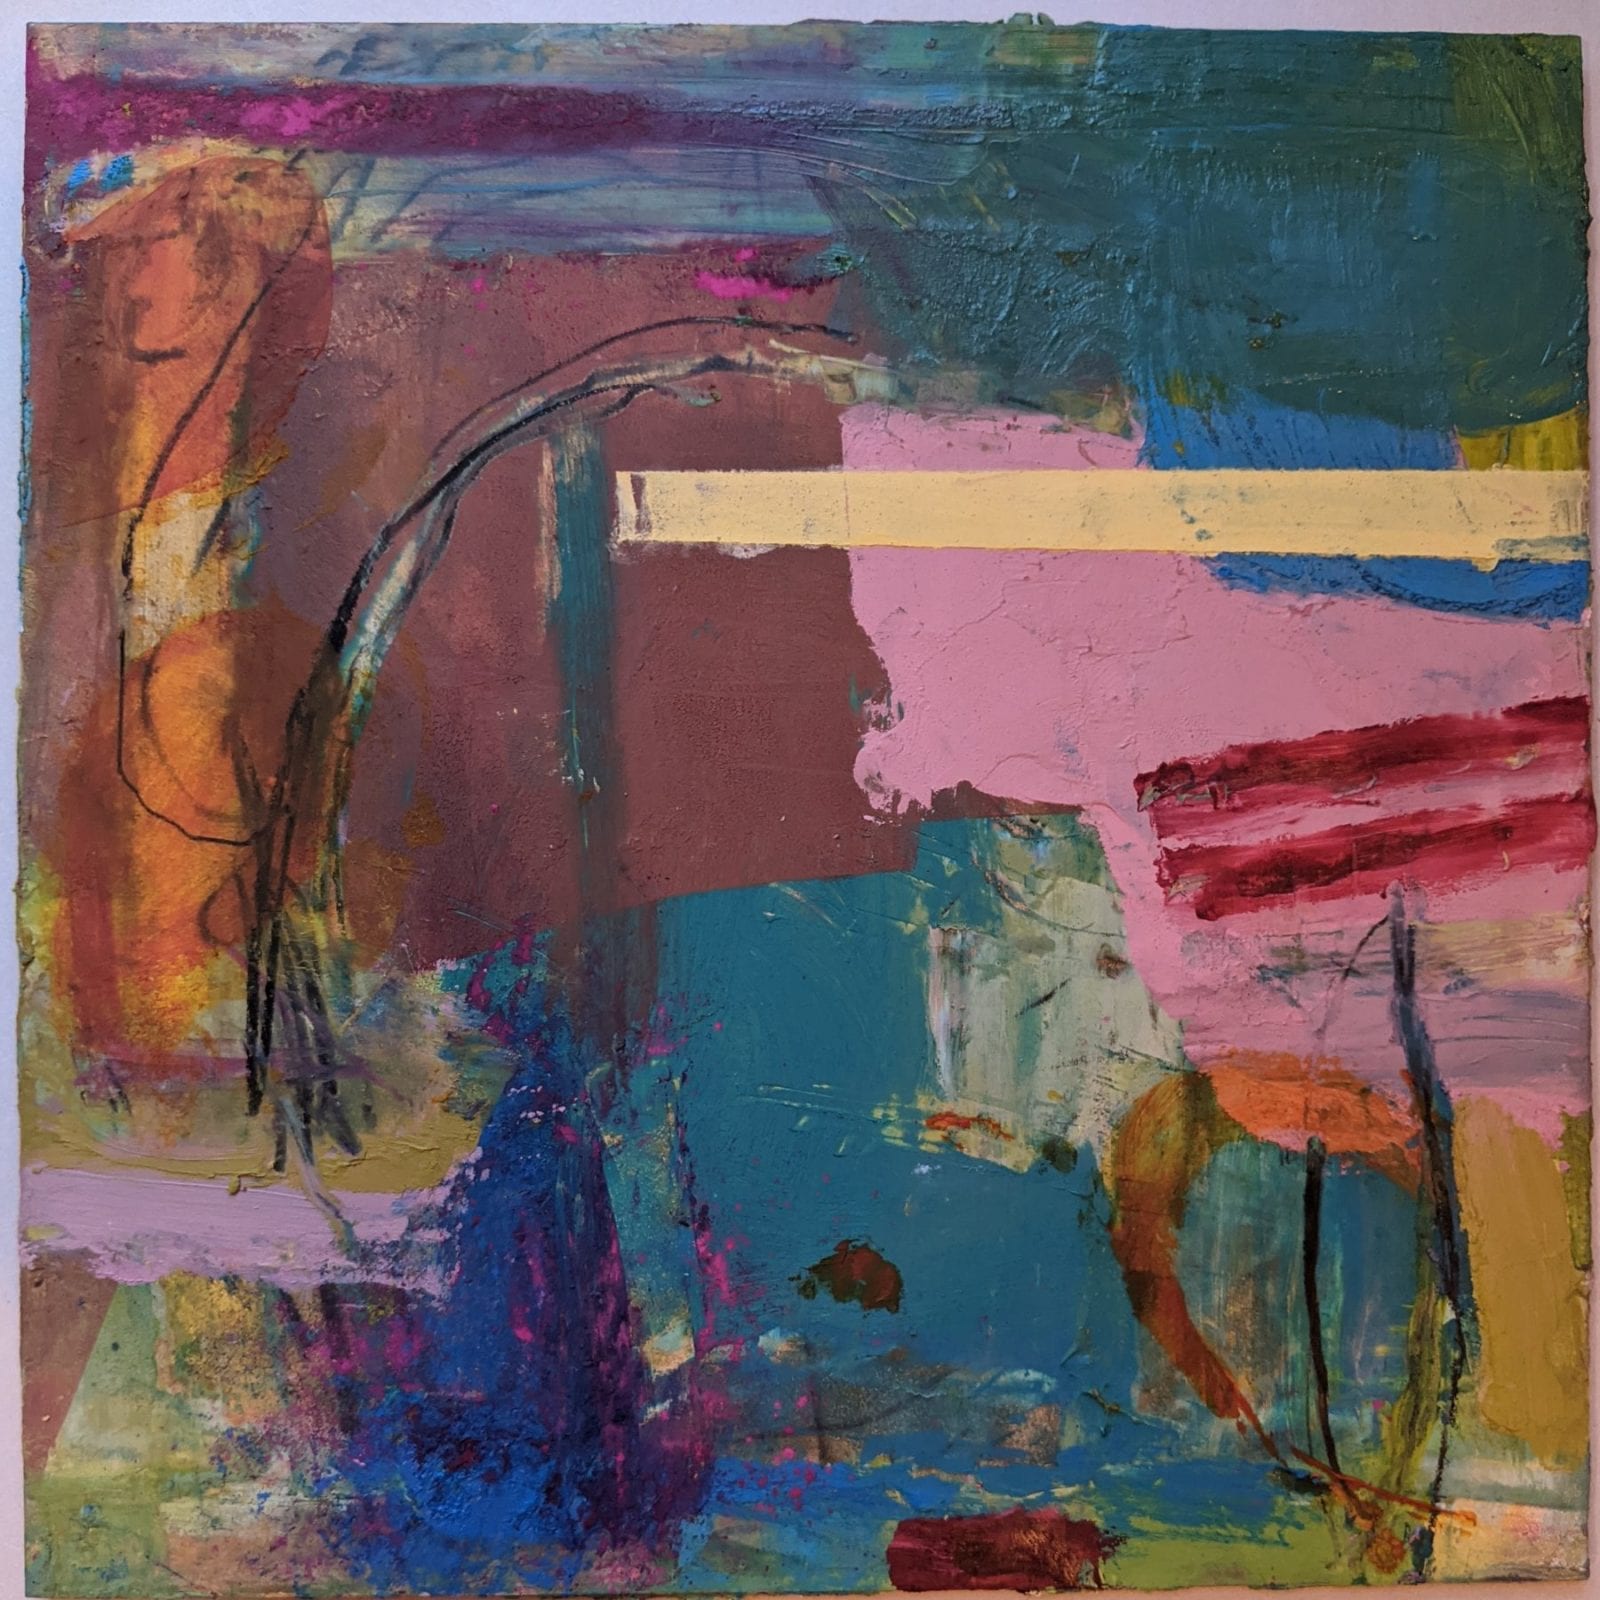 Karen Schoenitz is a nonprofit administrator and visual artist who lives  in West Windsor. Her work is primarily abstract with a focus on process  and experimentation.